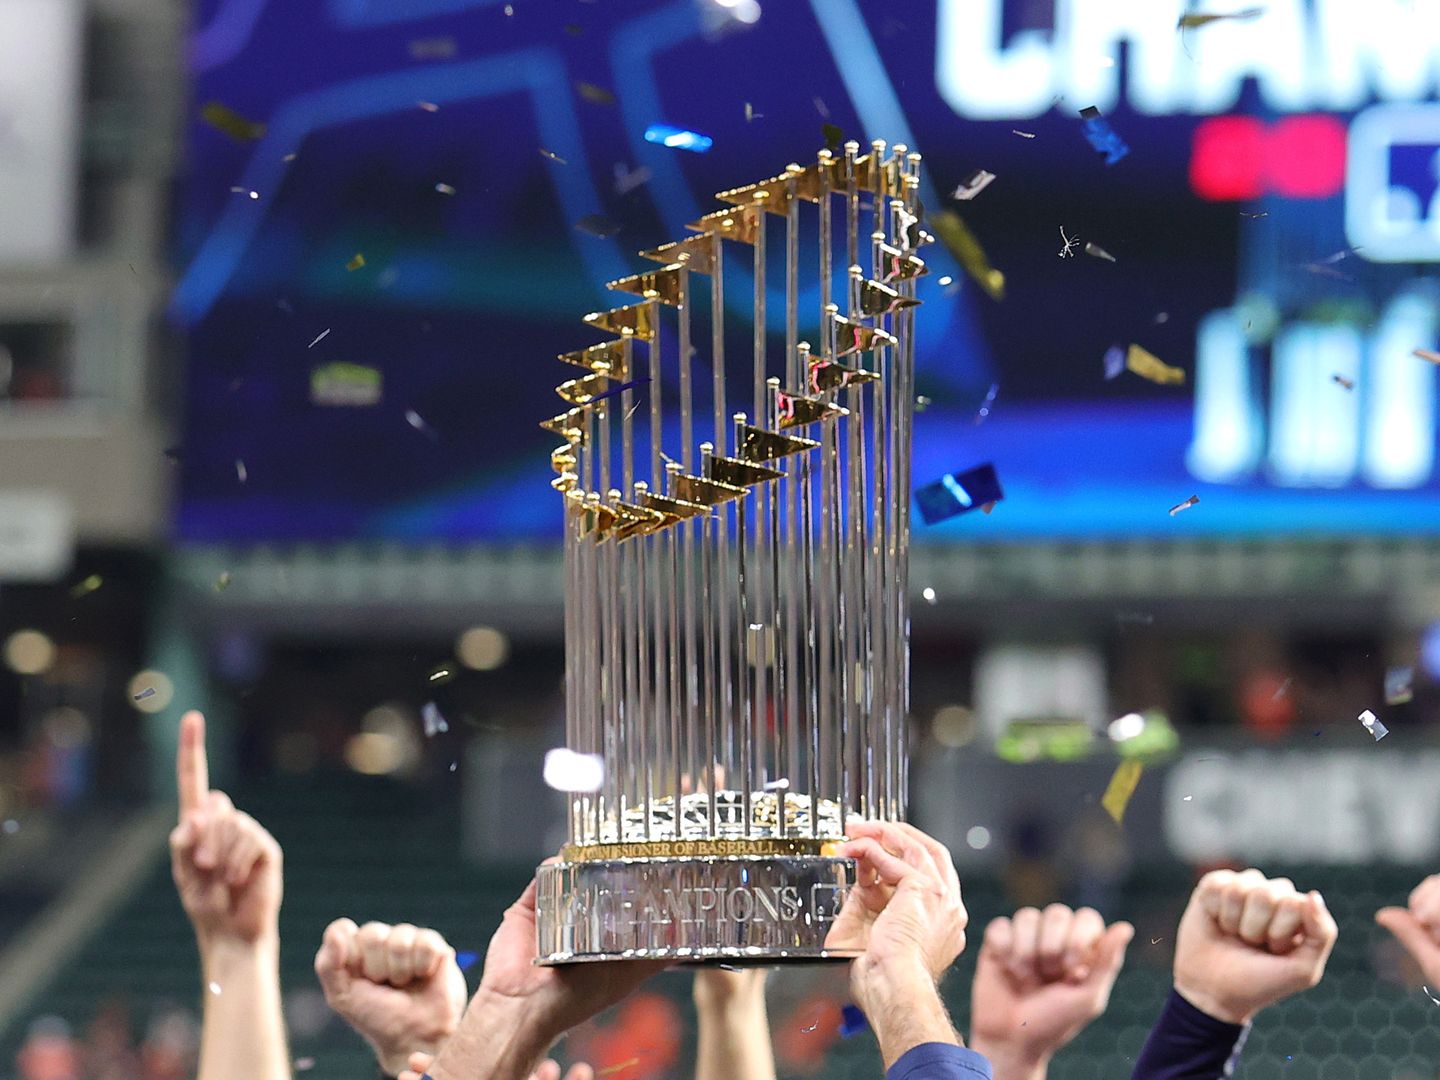 How to see Braves World Series trophy for free in Charlotte